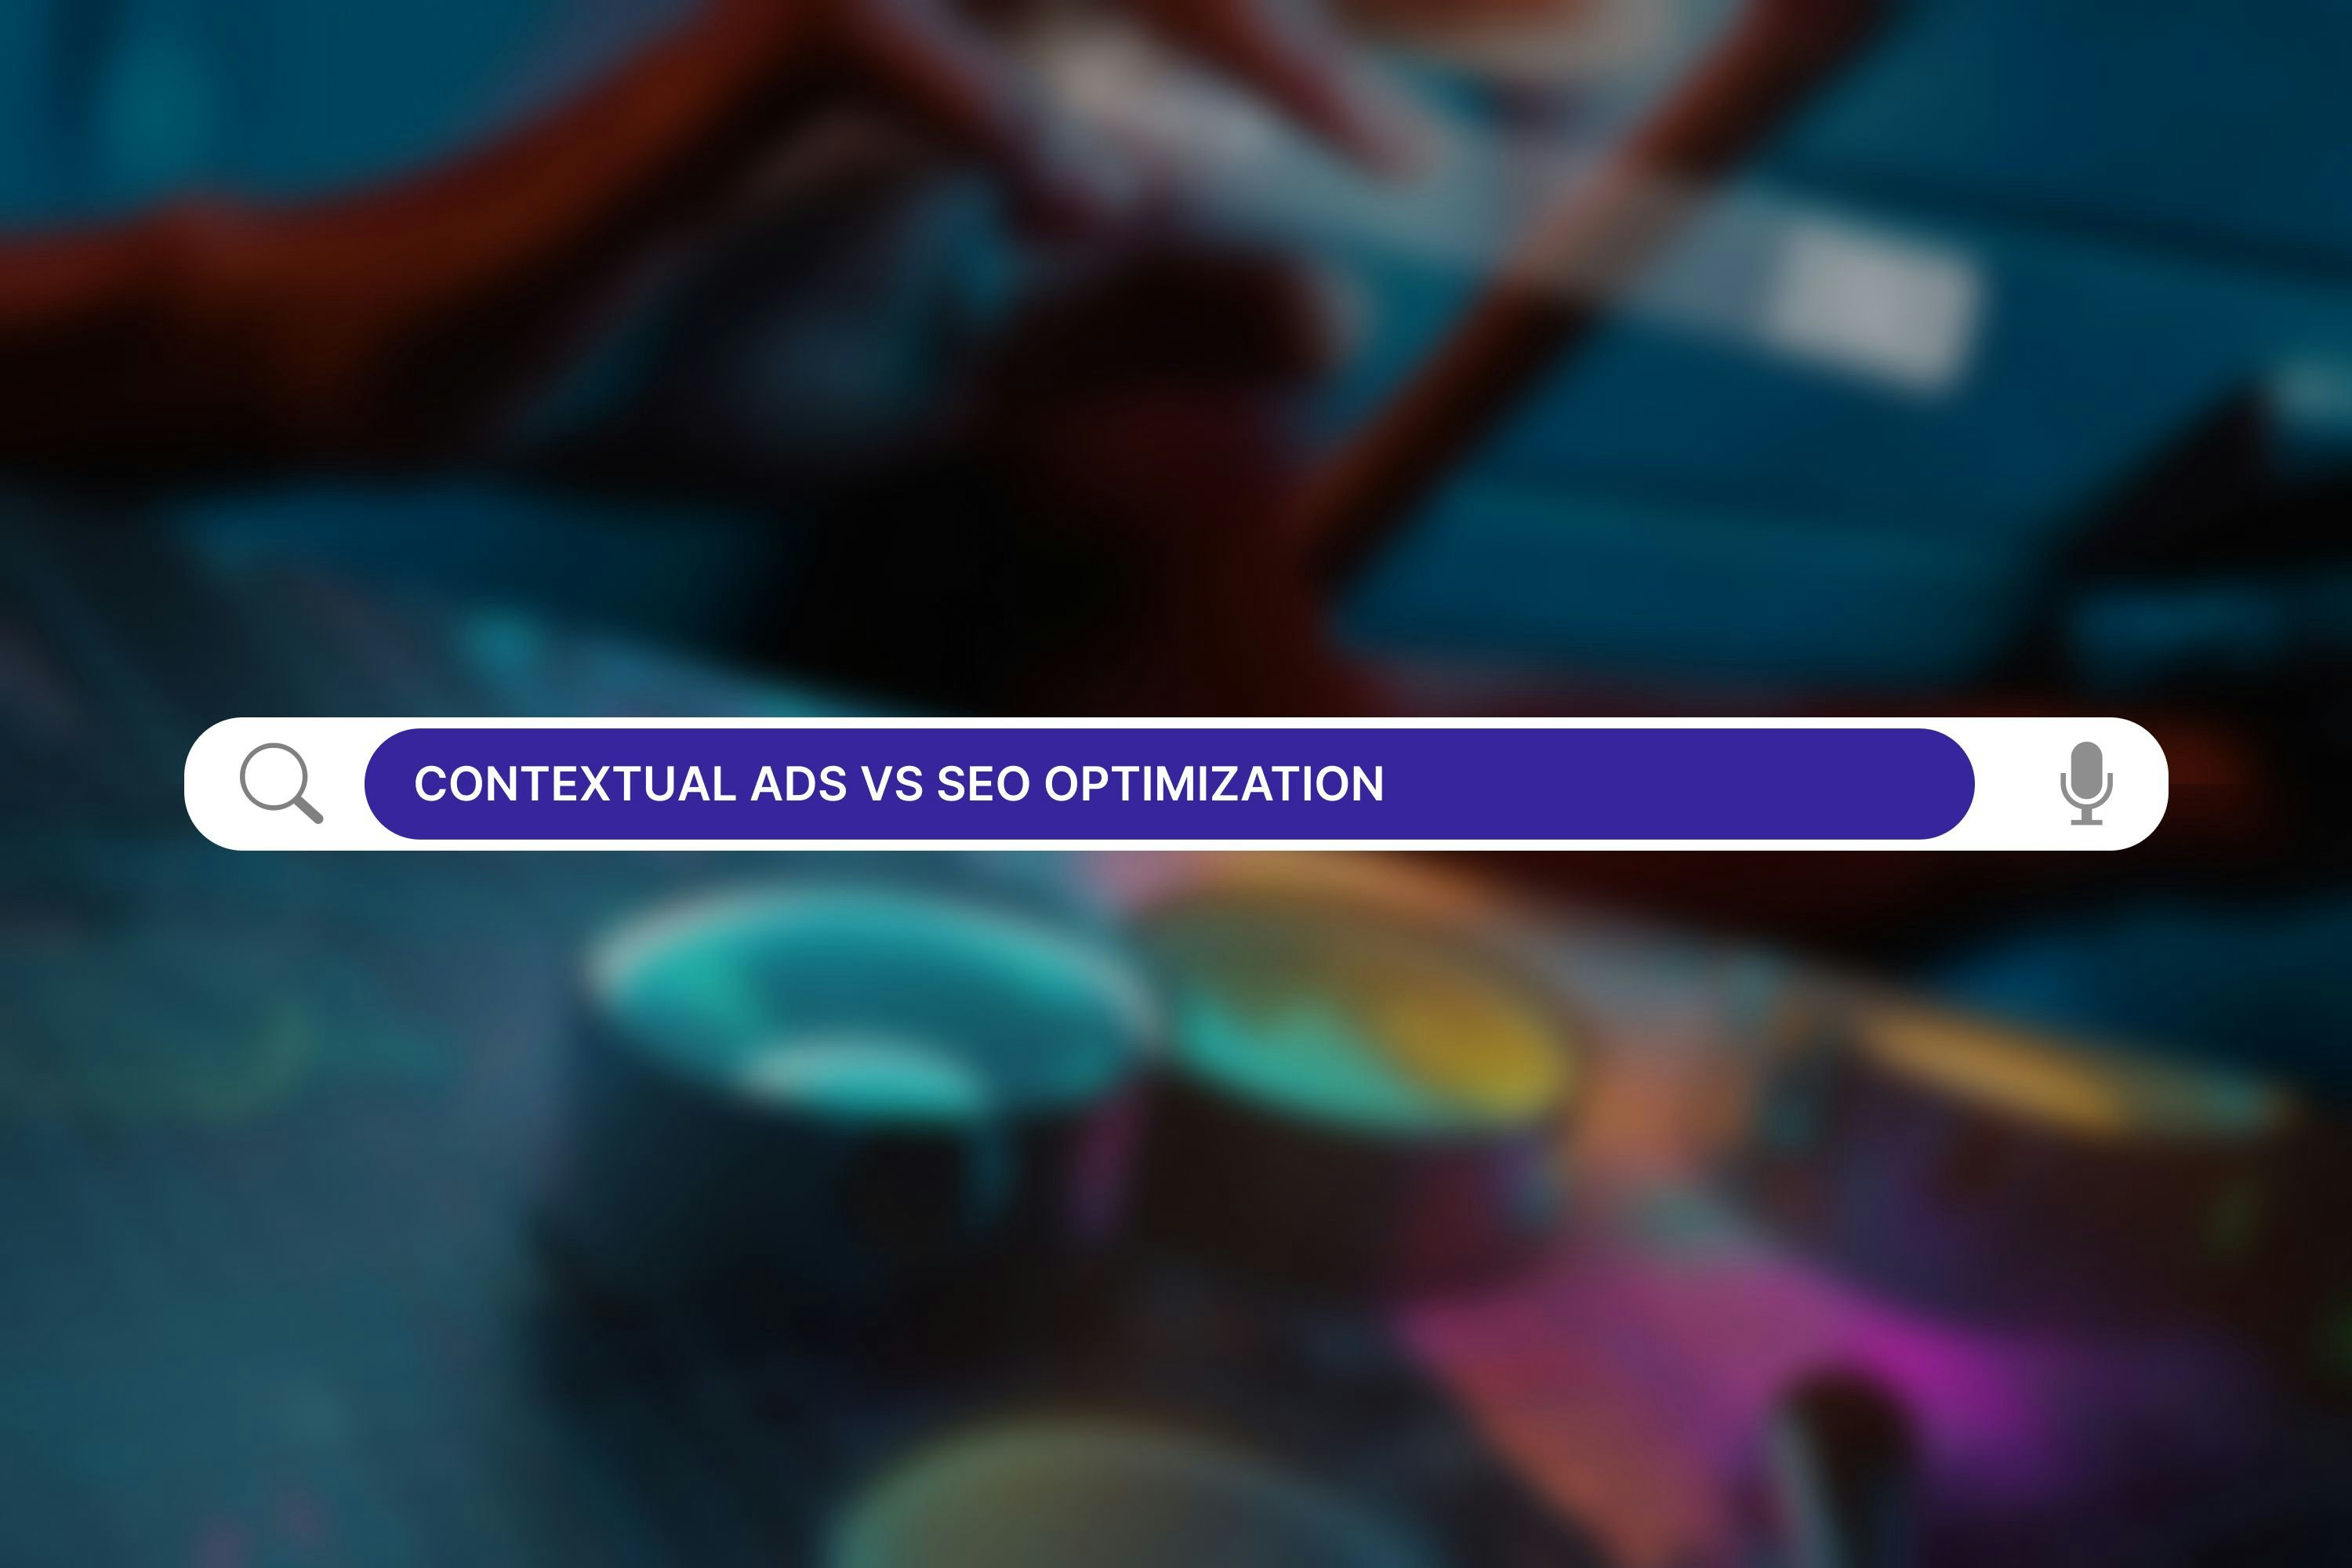 Contextual advertising or SEO optimization: what’s better?